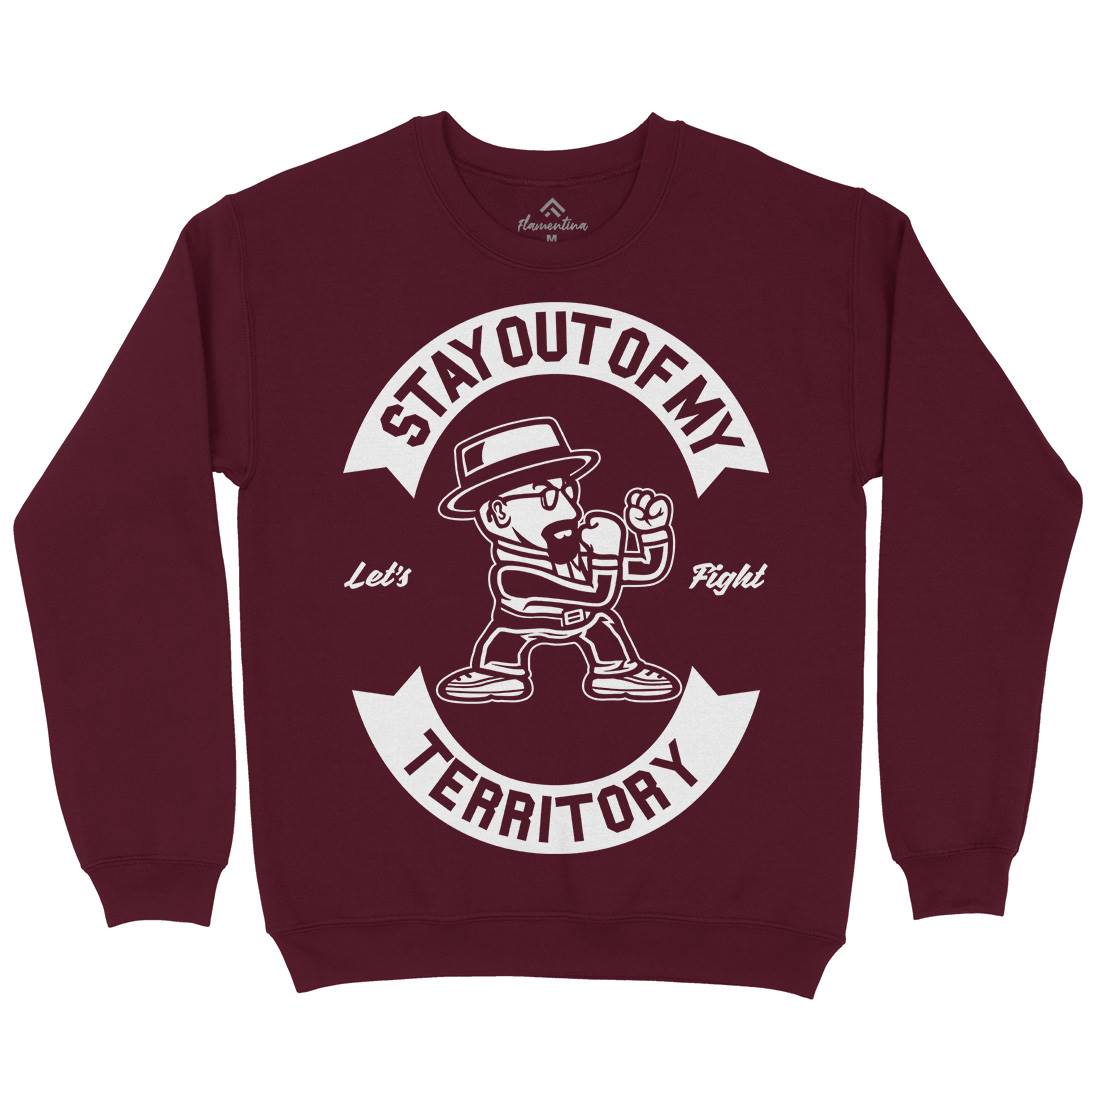 Stay Out Kids Crew Neck Sweatshirt Retro A284